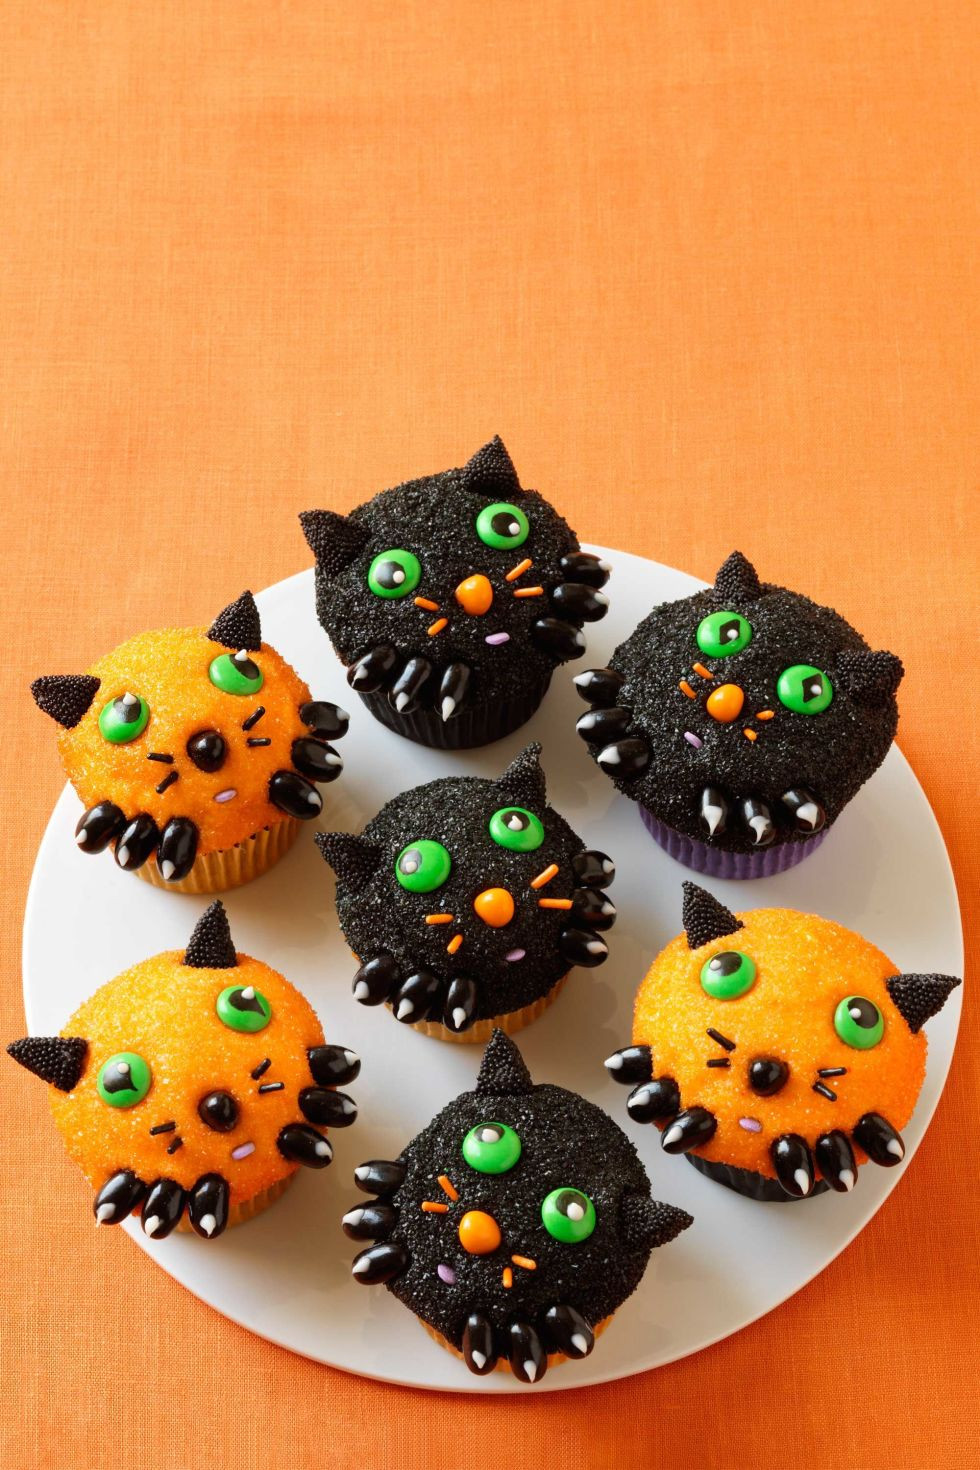 Halloween Cupcakes Decorations
 Top 15 Halloween cupcakes decorating ideas for You